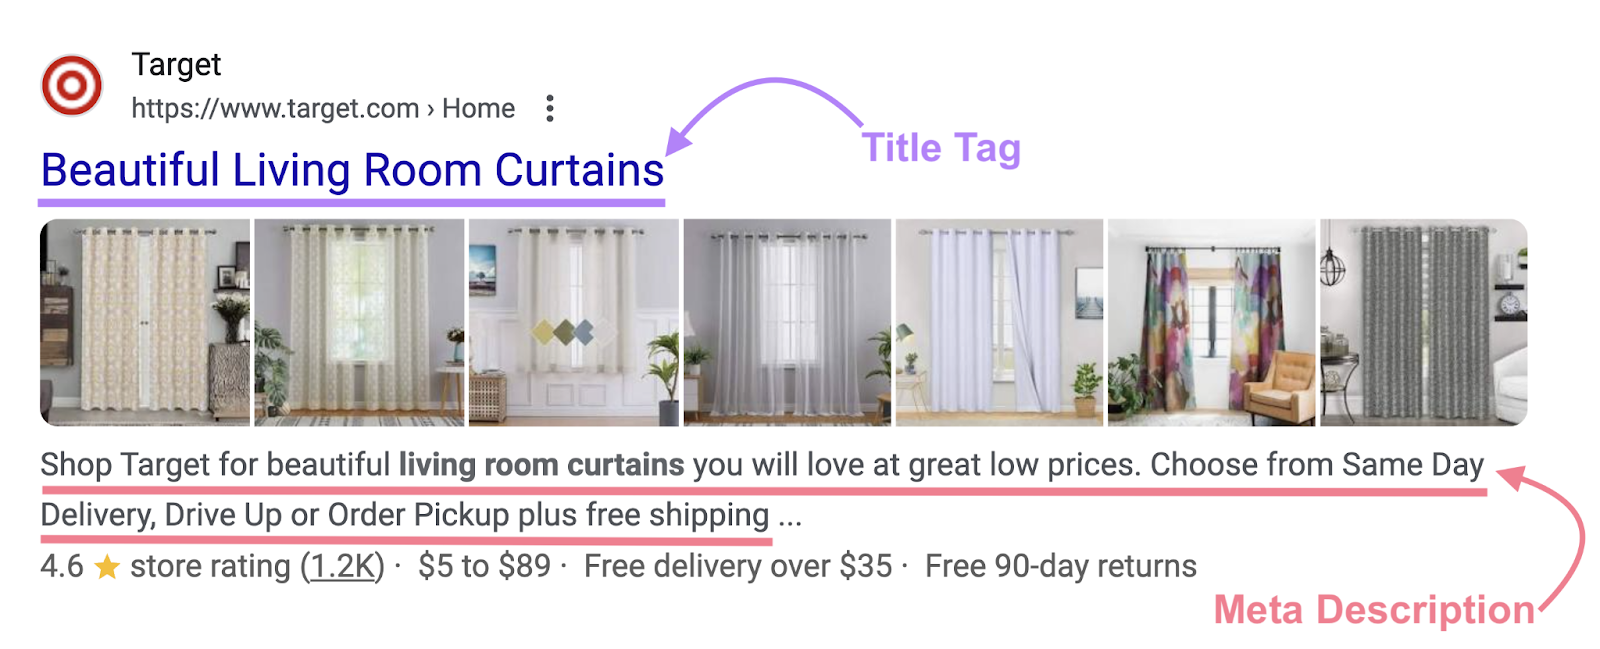 Title tag for Target's curtain listing is "Beautiful Living Room Curtains" and the meta statement  is highlighted beneath   the curtain images.